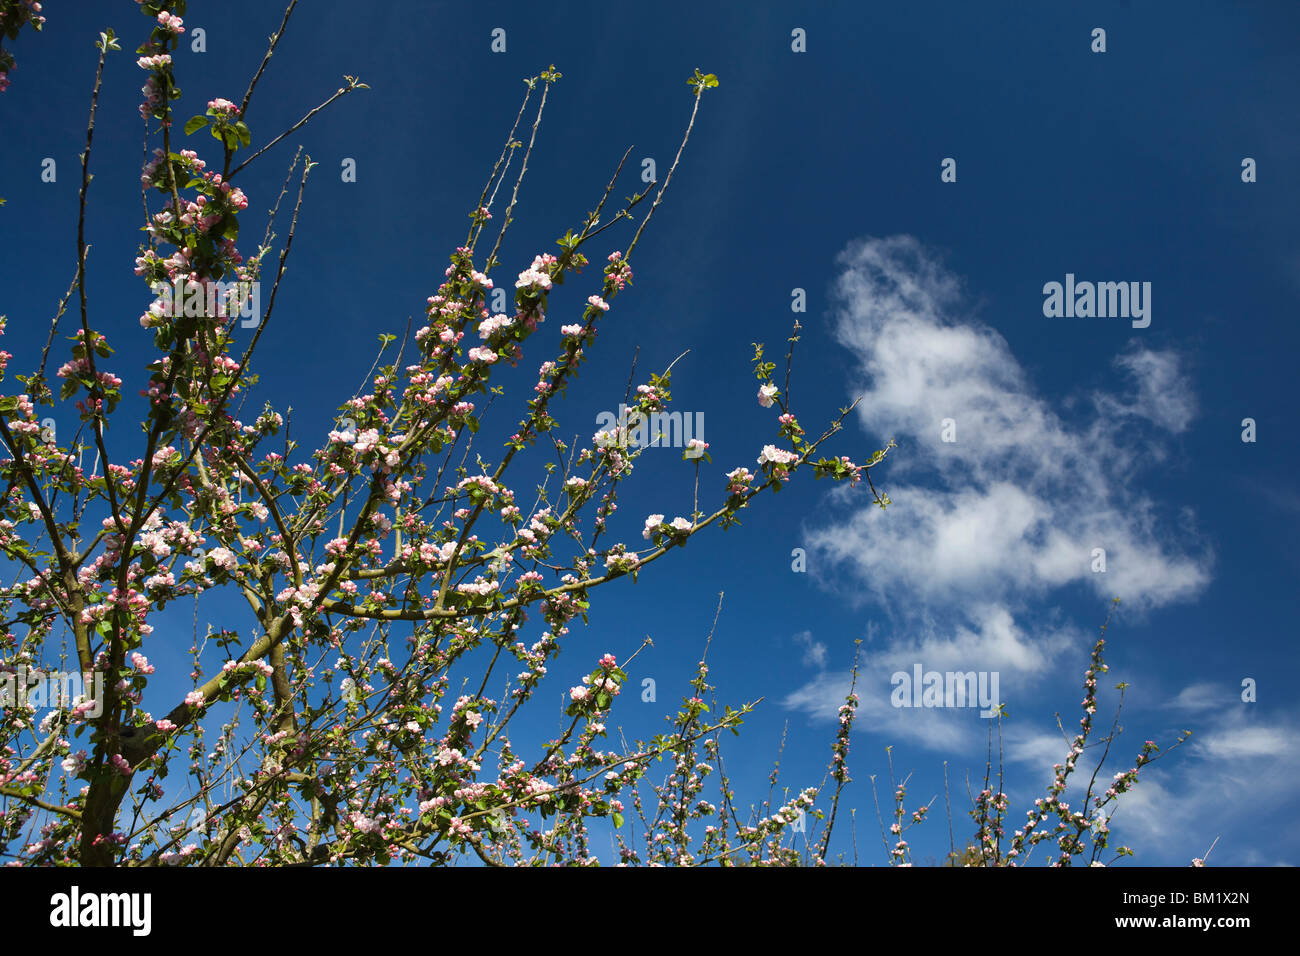 UK, England, Herefordshire, Putley Dragon Orchard, cider apple tree branches in blossom in May against blue sky Stock Photo